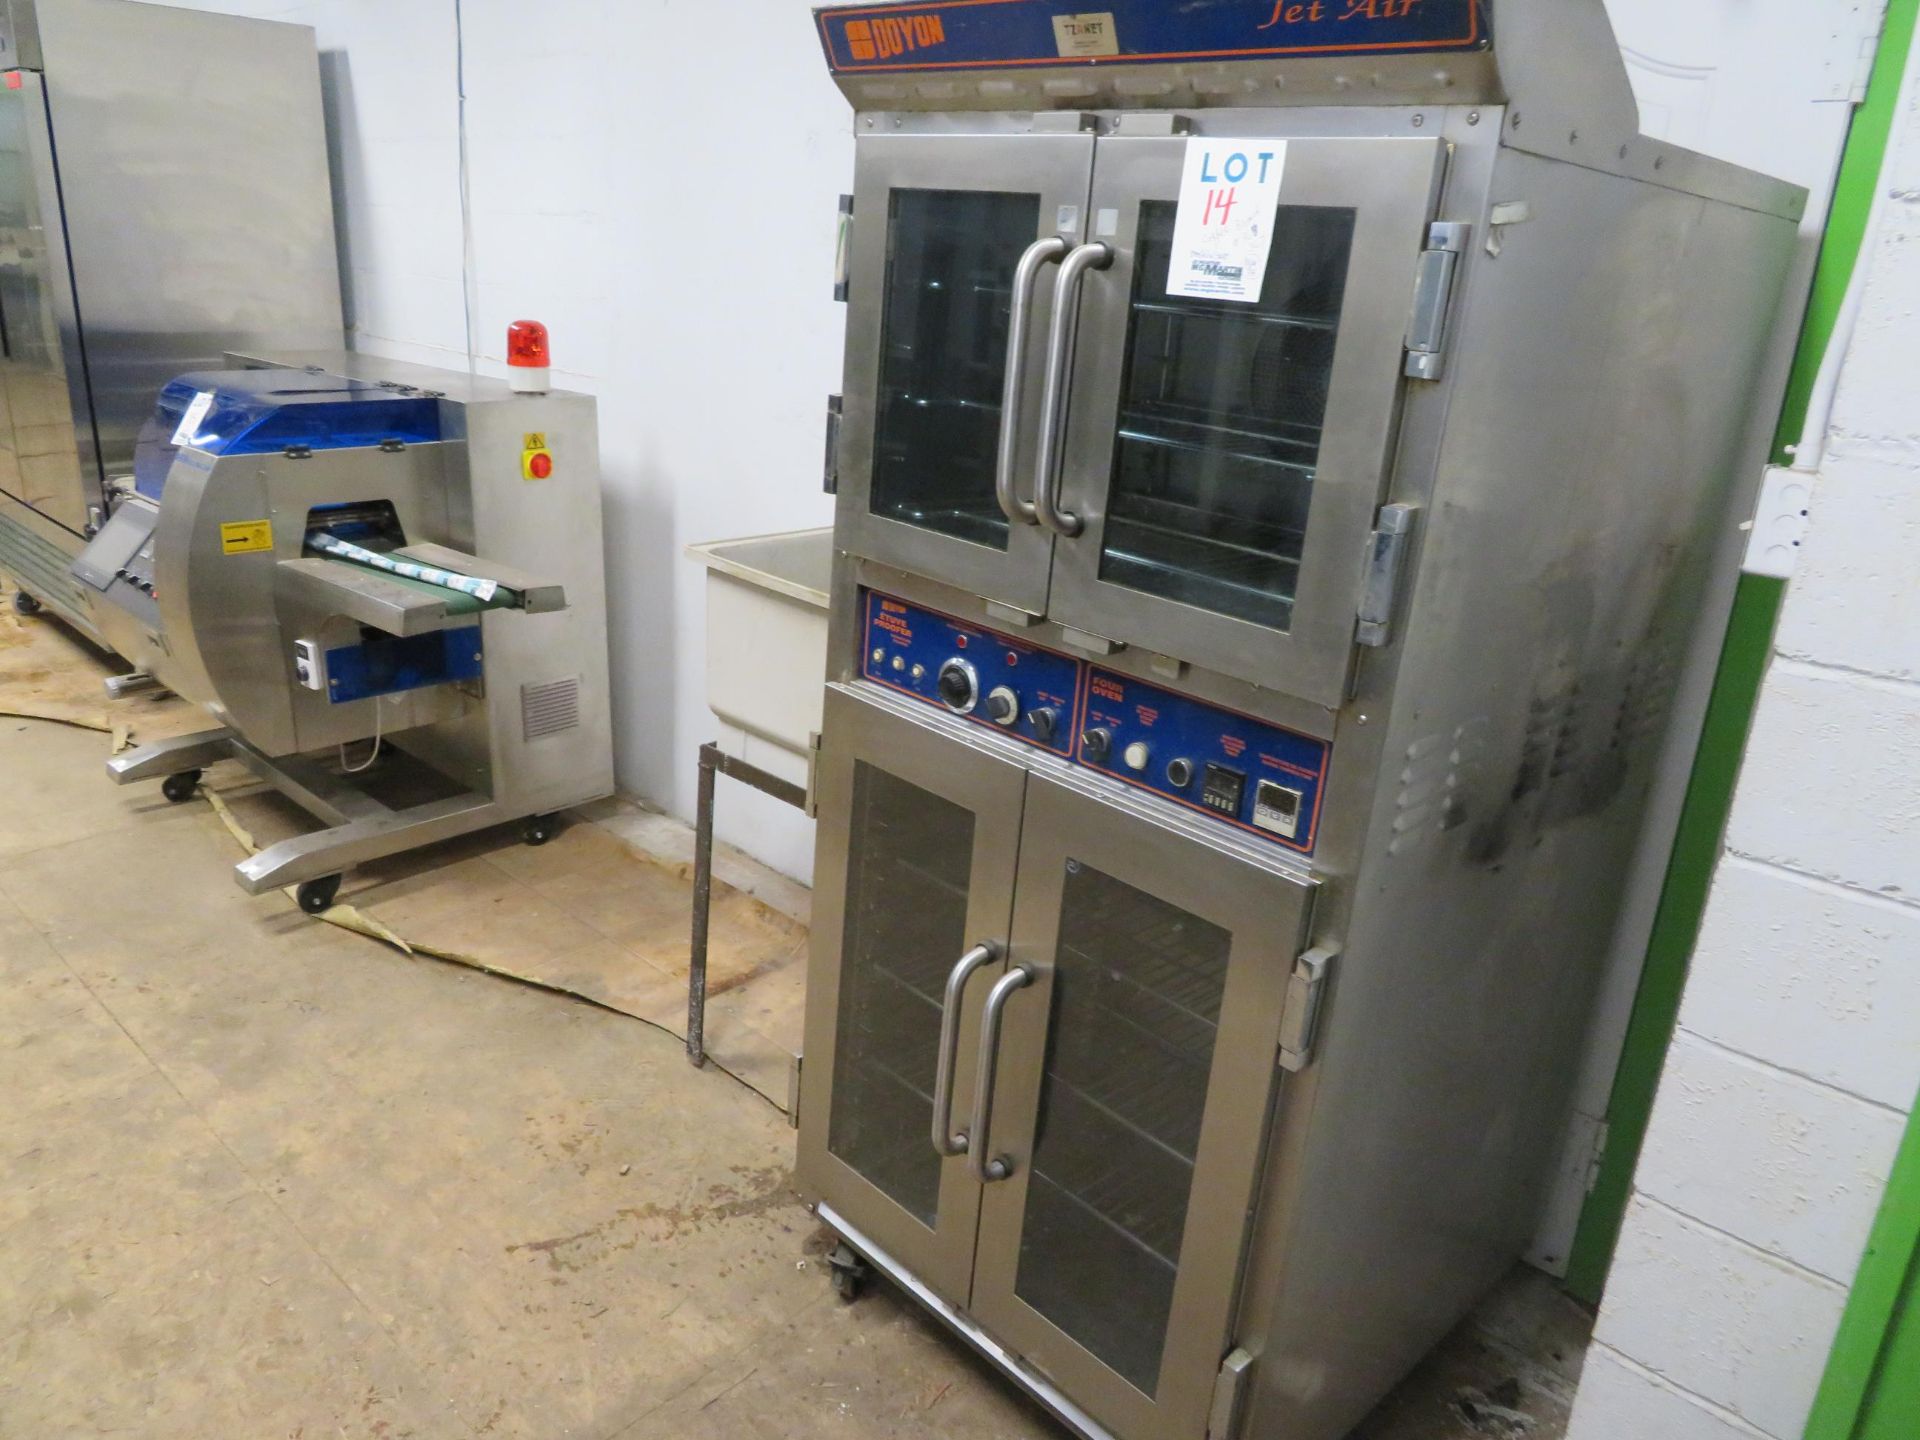 DOYON oven and proofer on wheels, Mod # JET AIR, approx. 32"w x 33"d x 71"h - Image 2 of 4